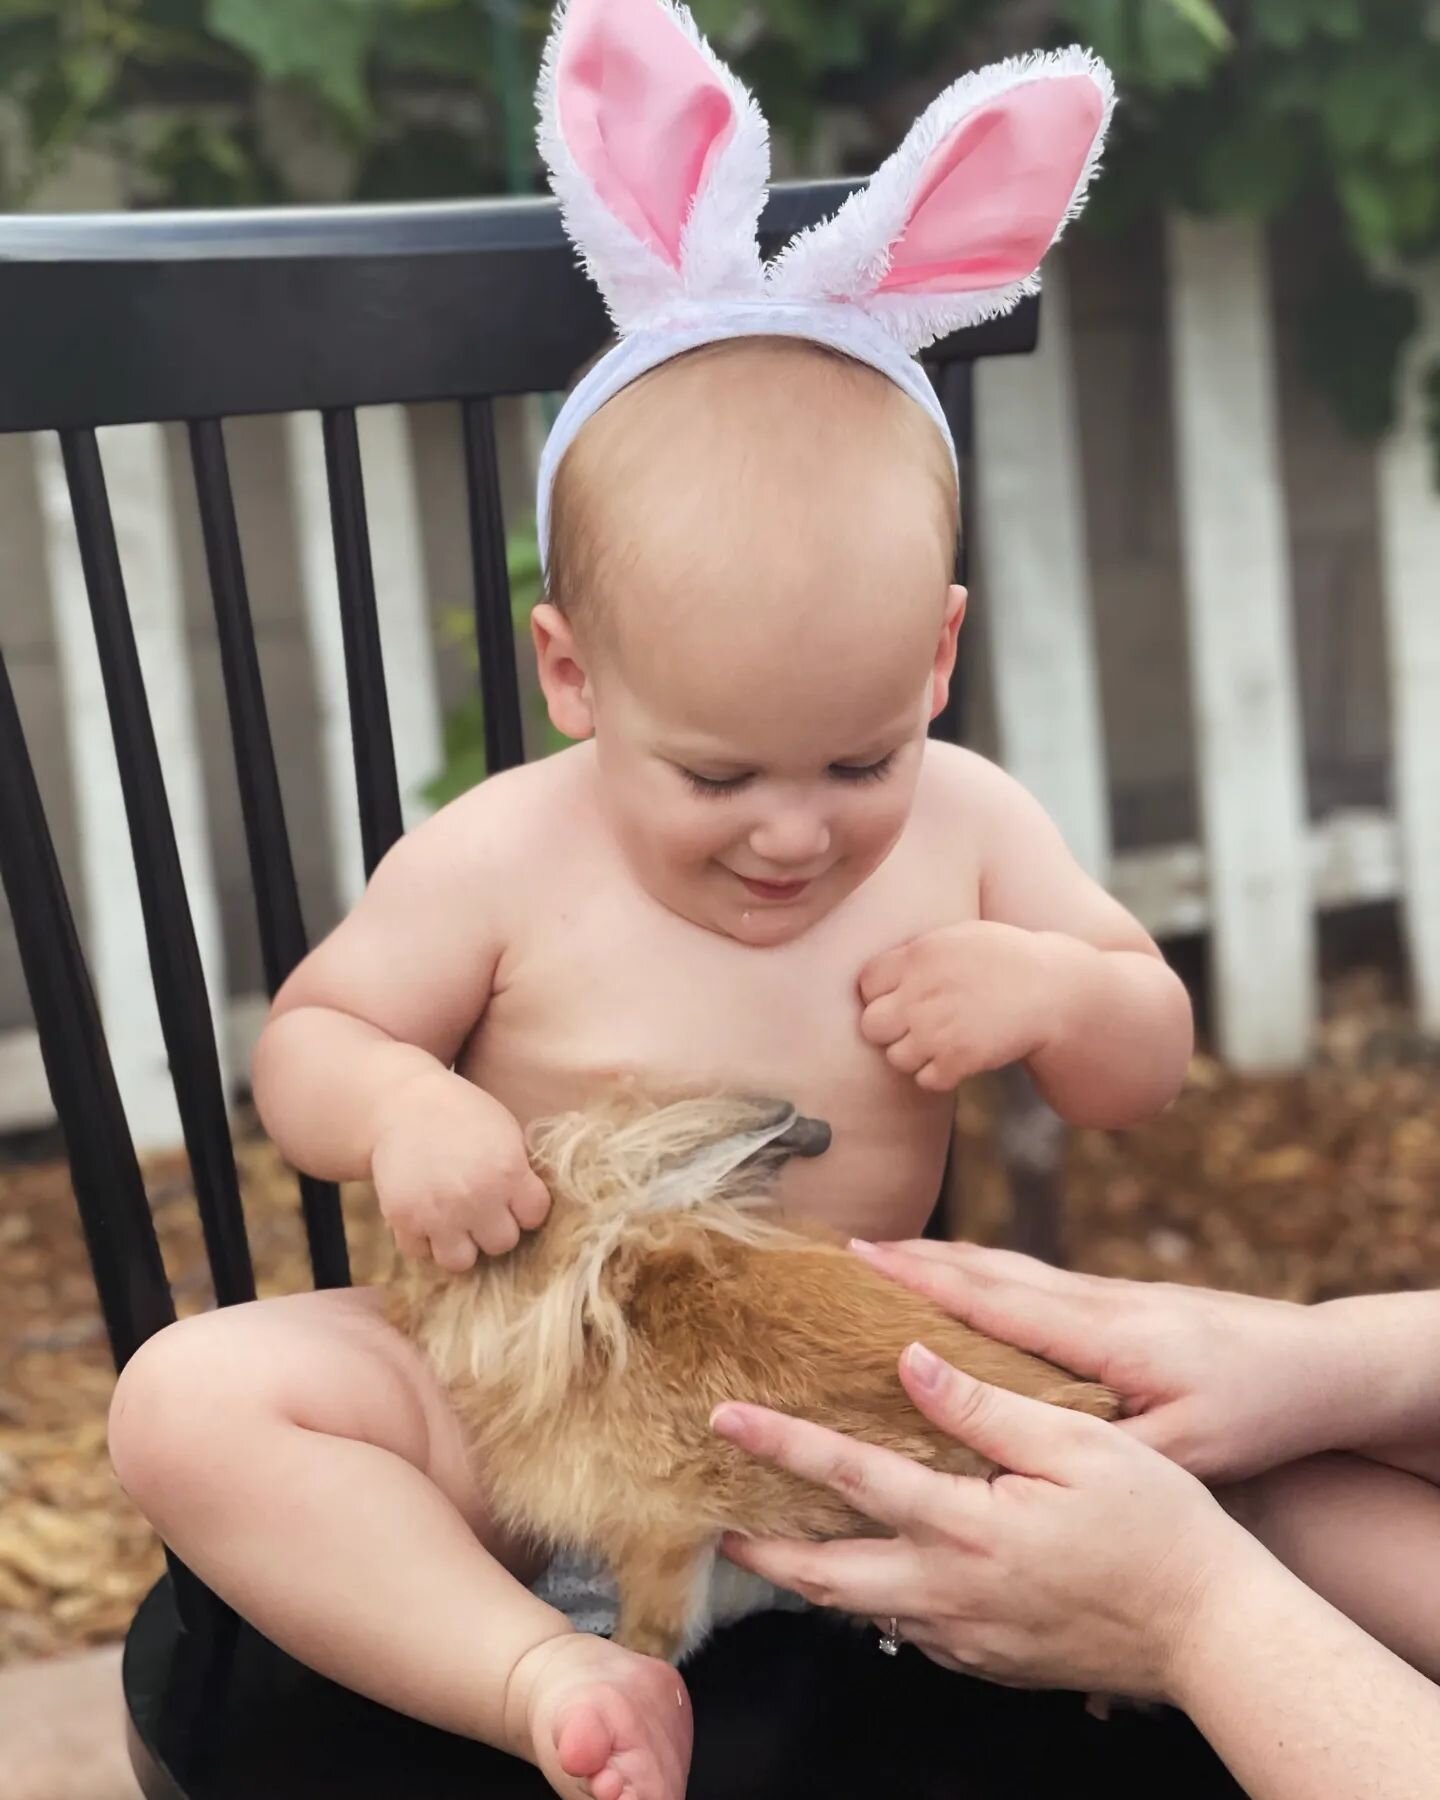 Take your Easter photos at Baby Bear this Saturday! We have an adorable Springtime setup with a real Bunny 🐰 plus face painting, make a windchime, and carrot cake pops 🥕 Get your tickets online at www.BabyBearAZ.com